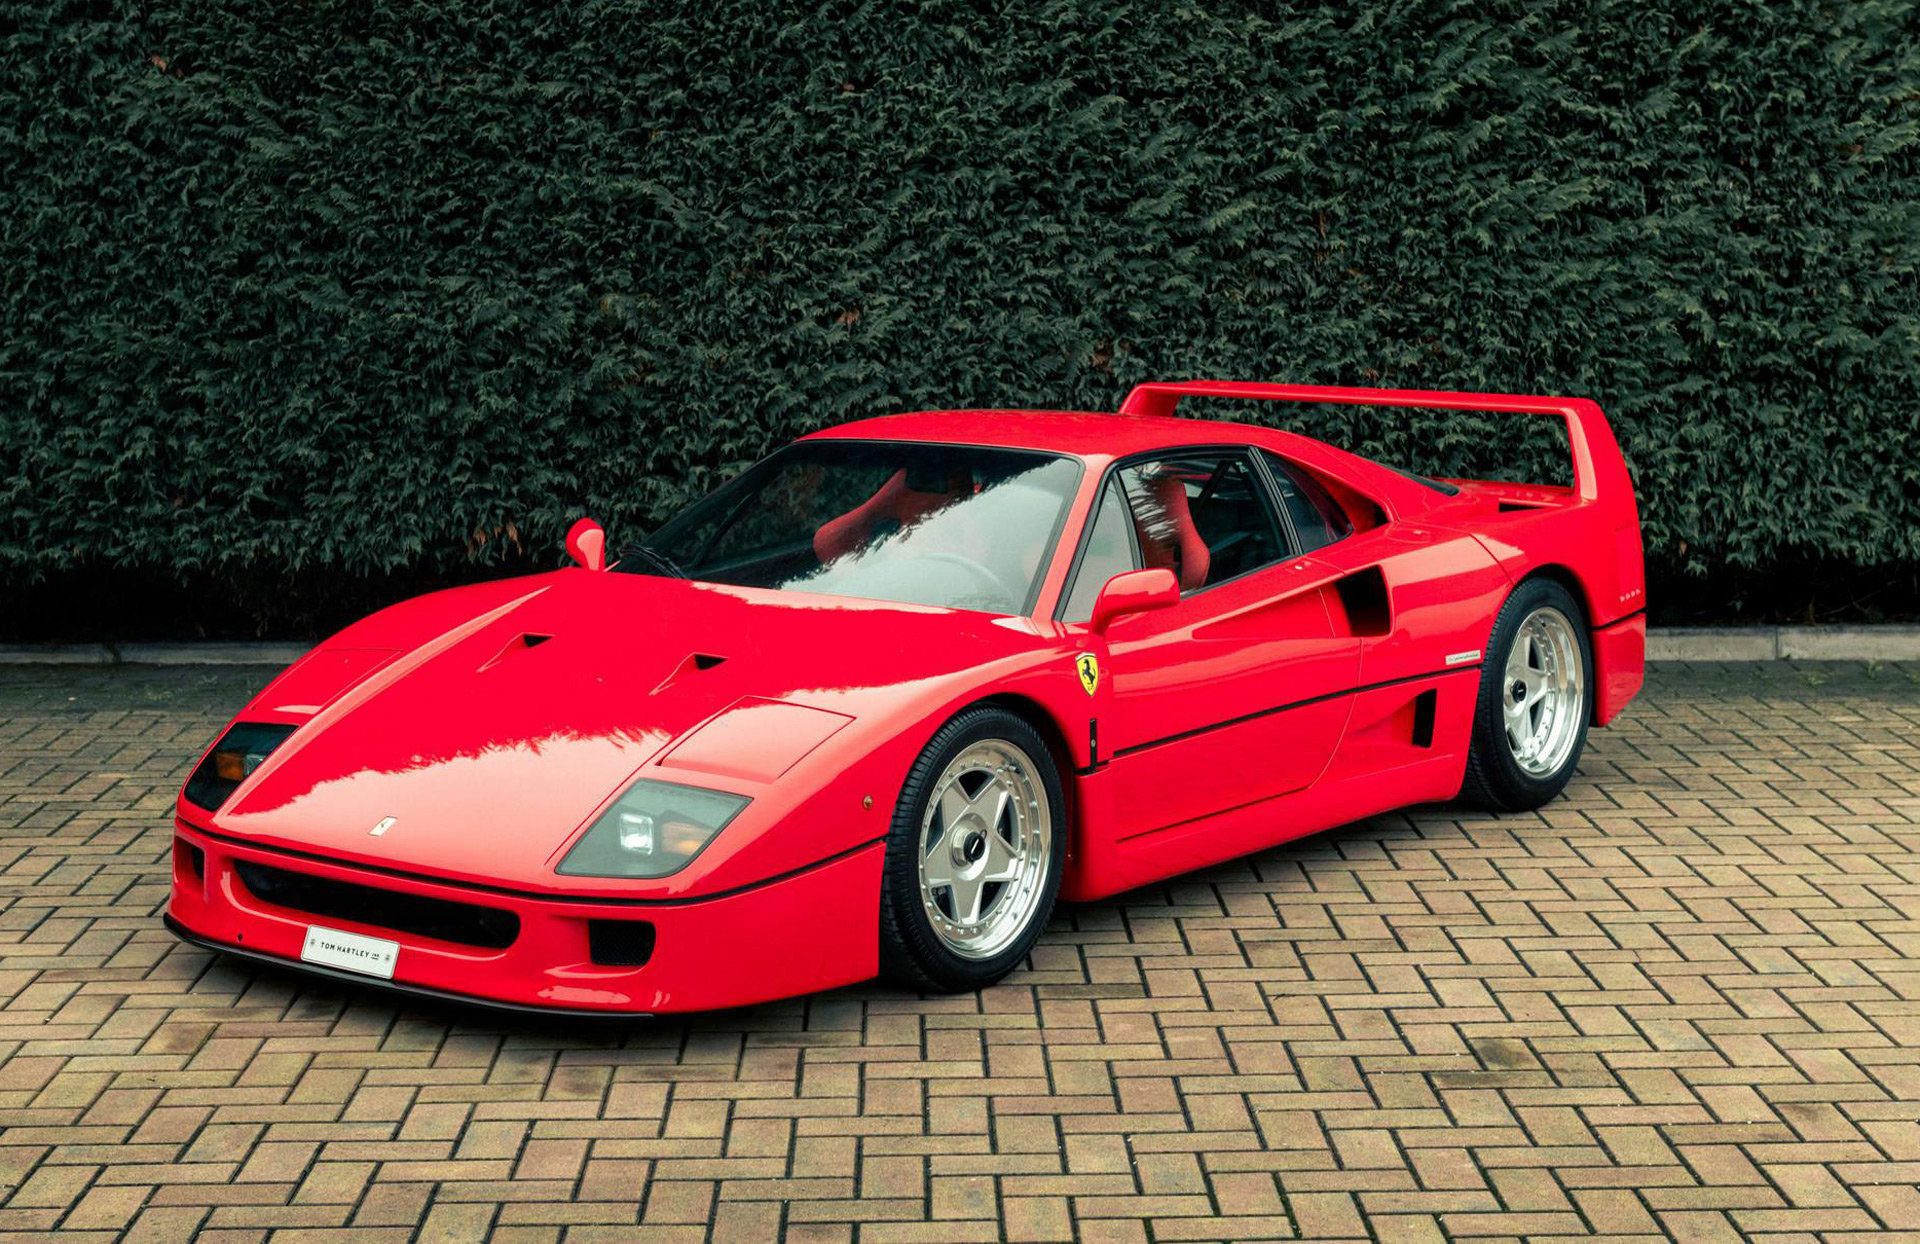 1674138676 The Mercedes F1 bosss Ferrari F40 is up for sale